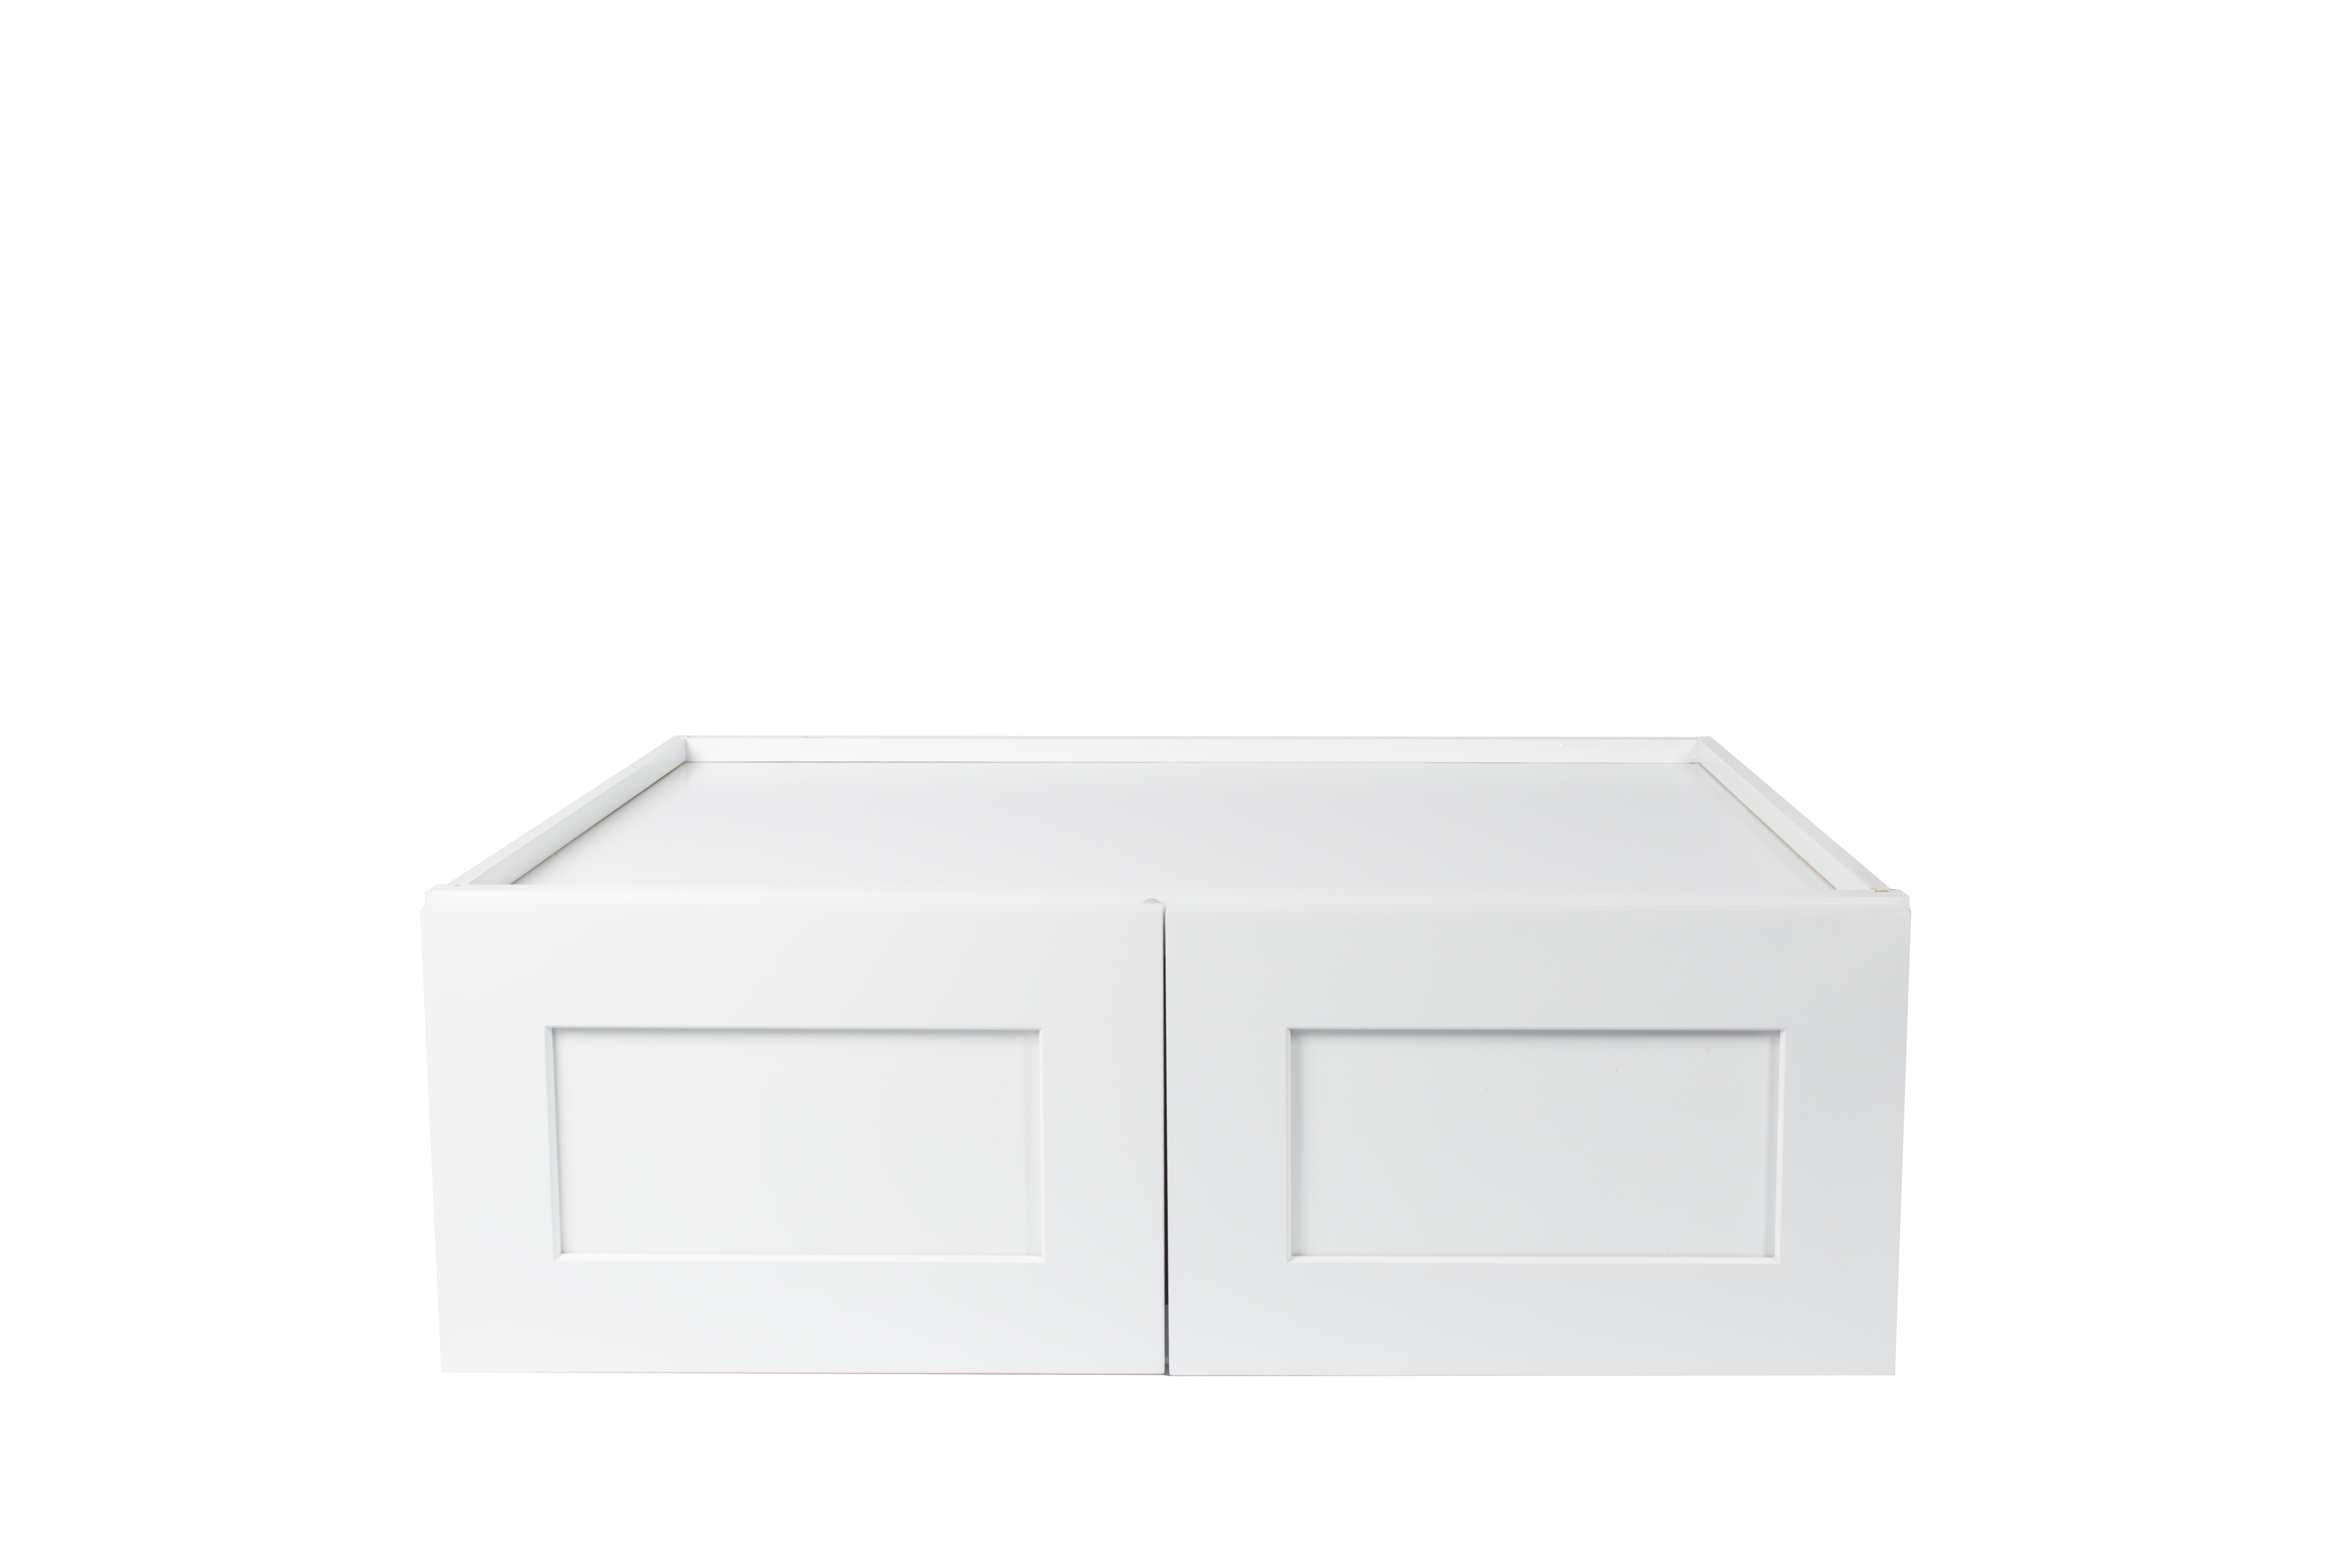 Ready to Assemble 36x18x12 in. Shaker High Double Door Wall Cabinet in White